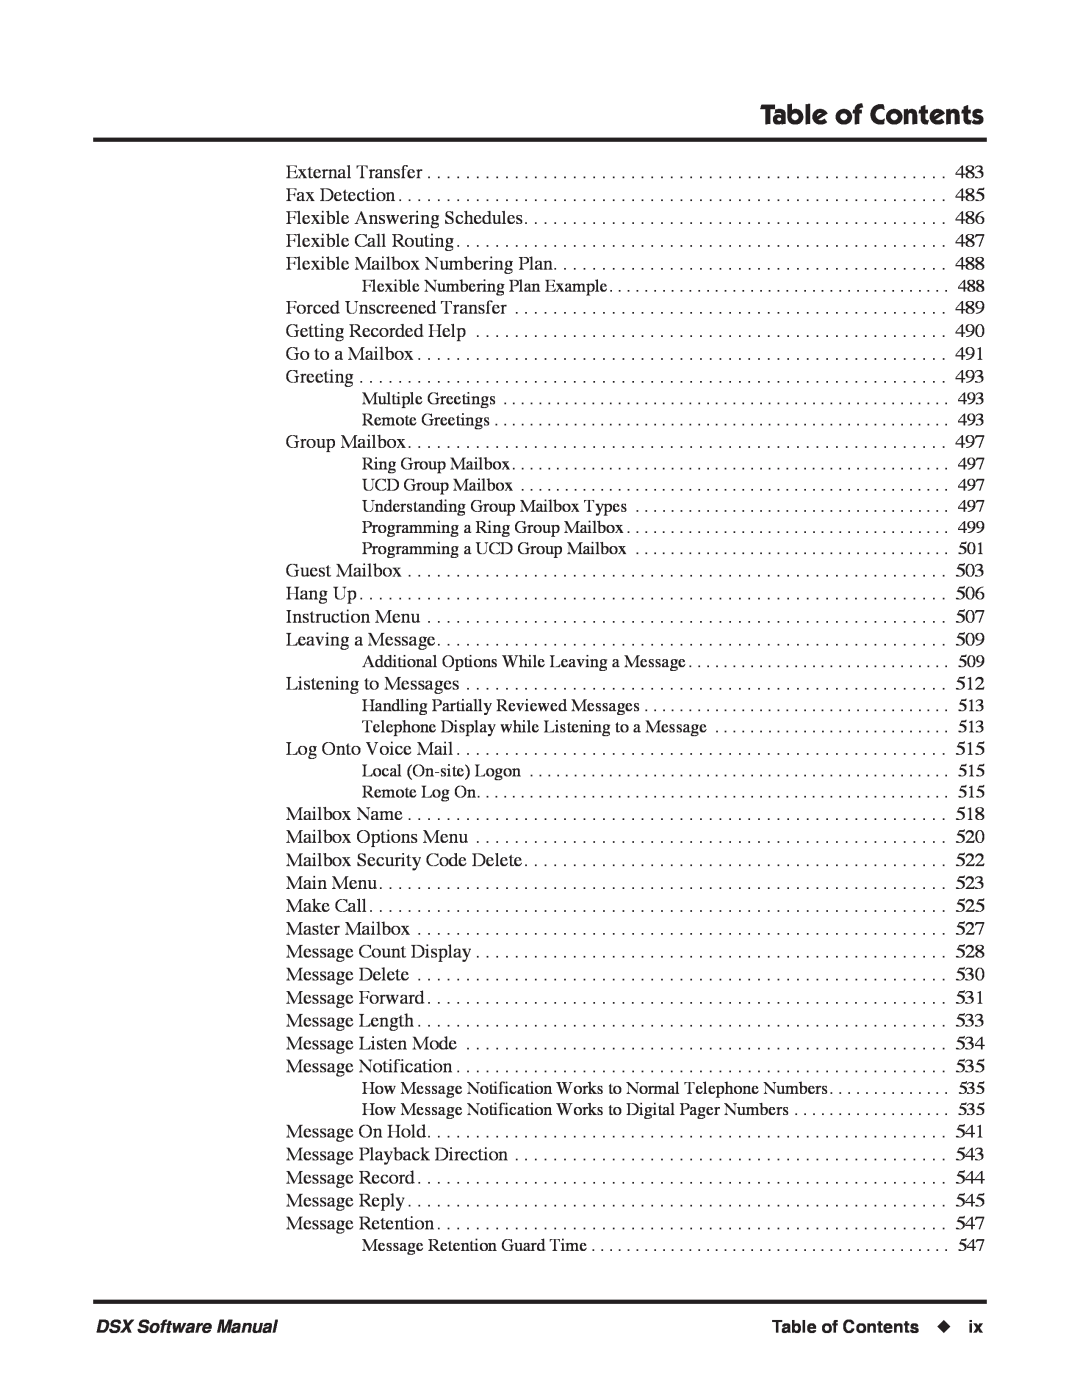 NEC P, N 1093100 software manual Table of Contents, External Transfer 